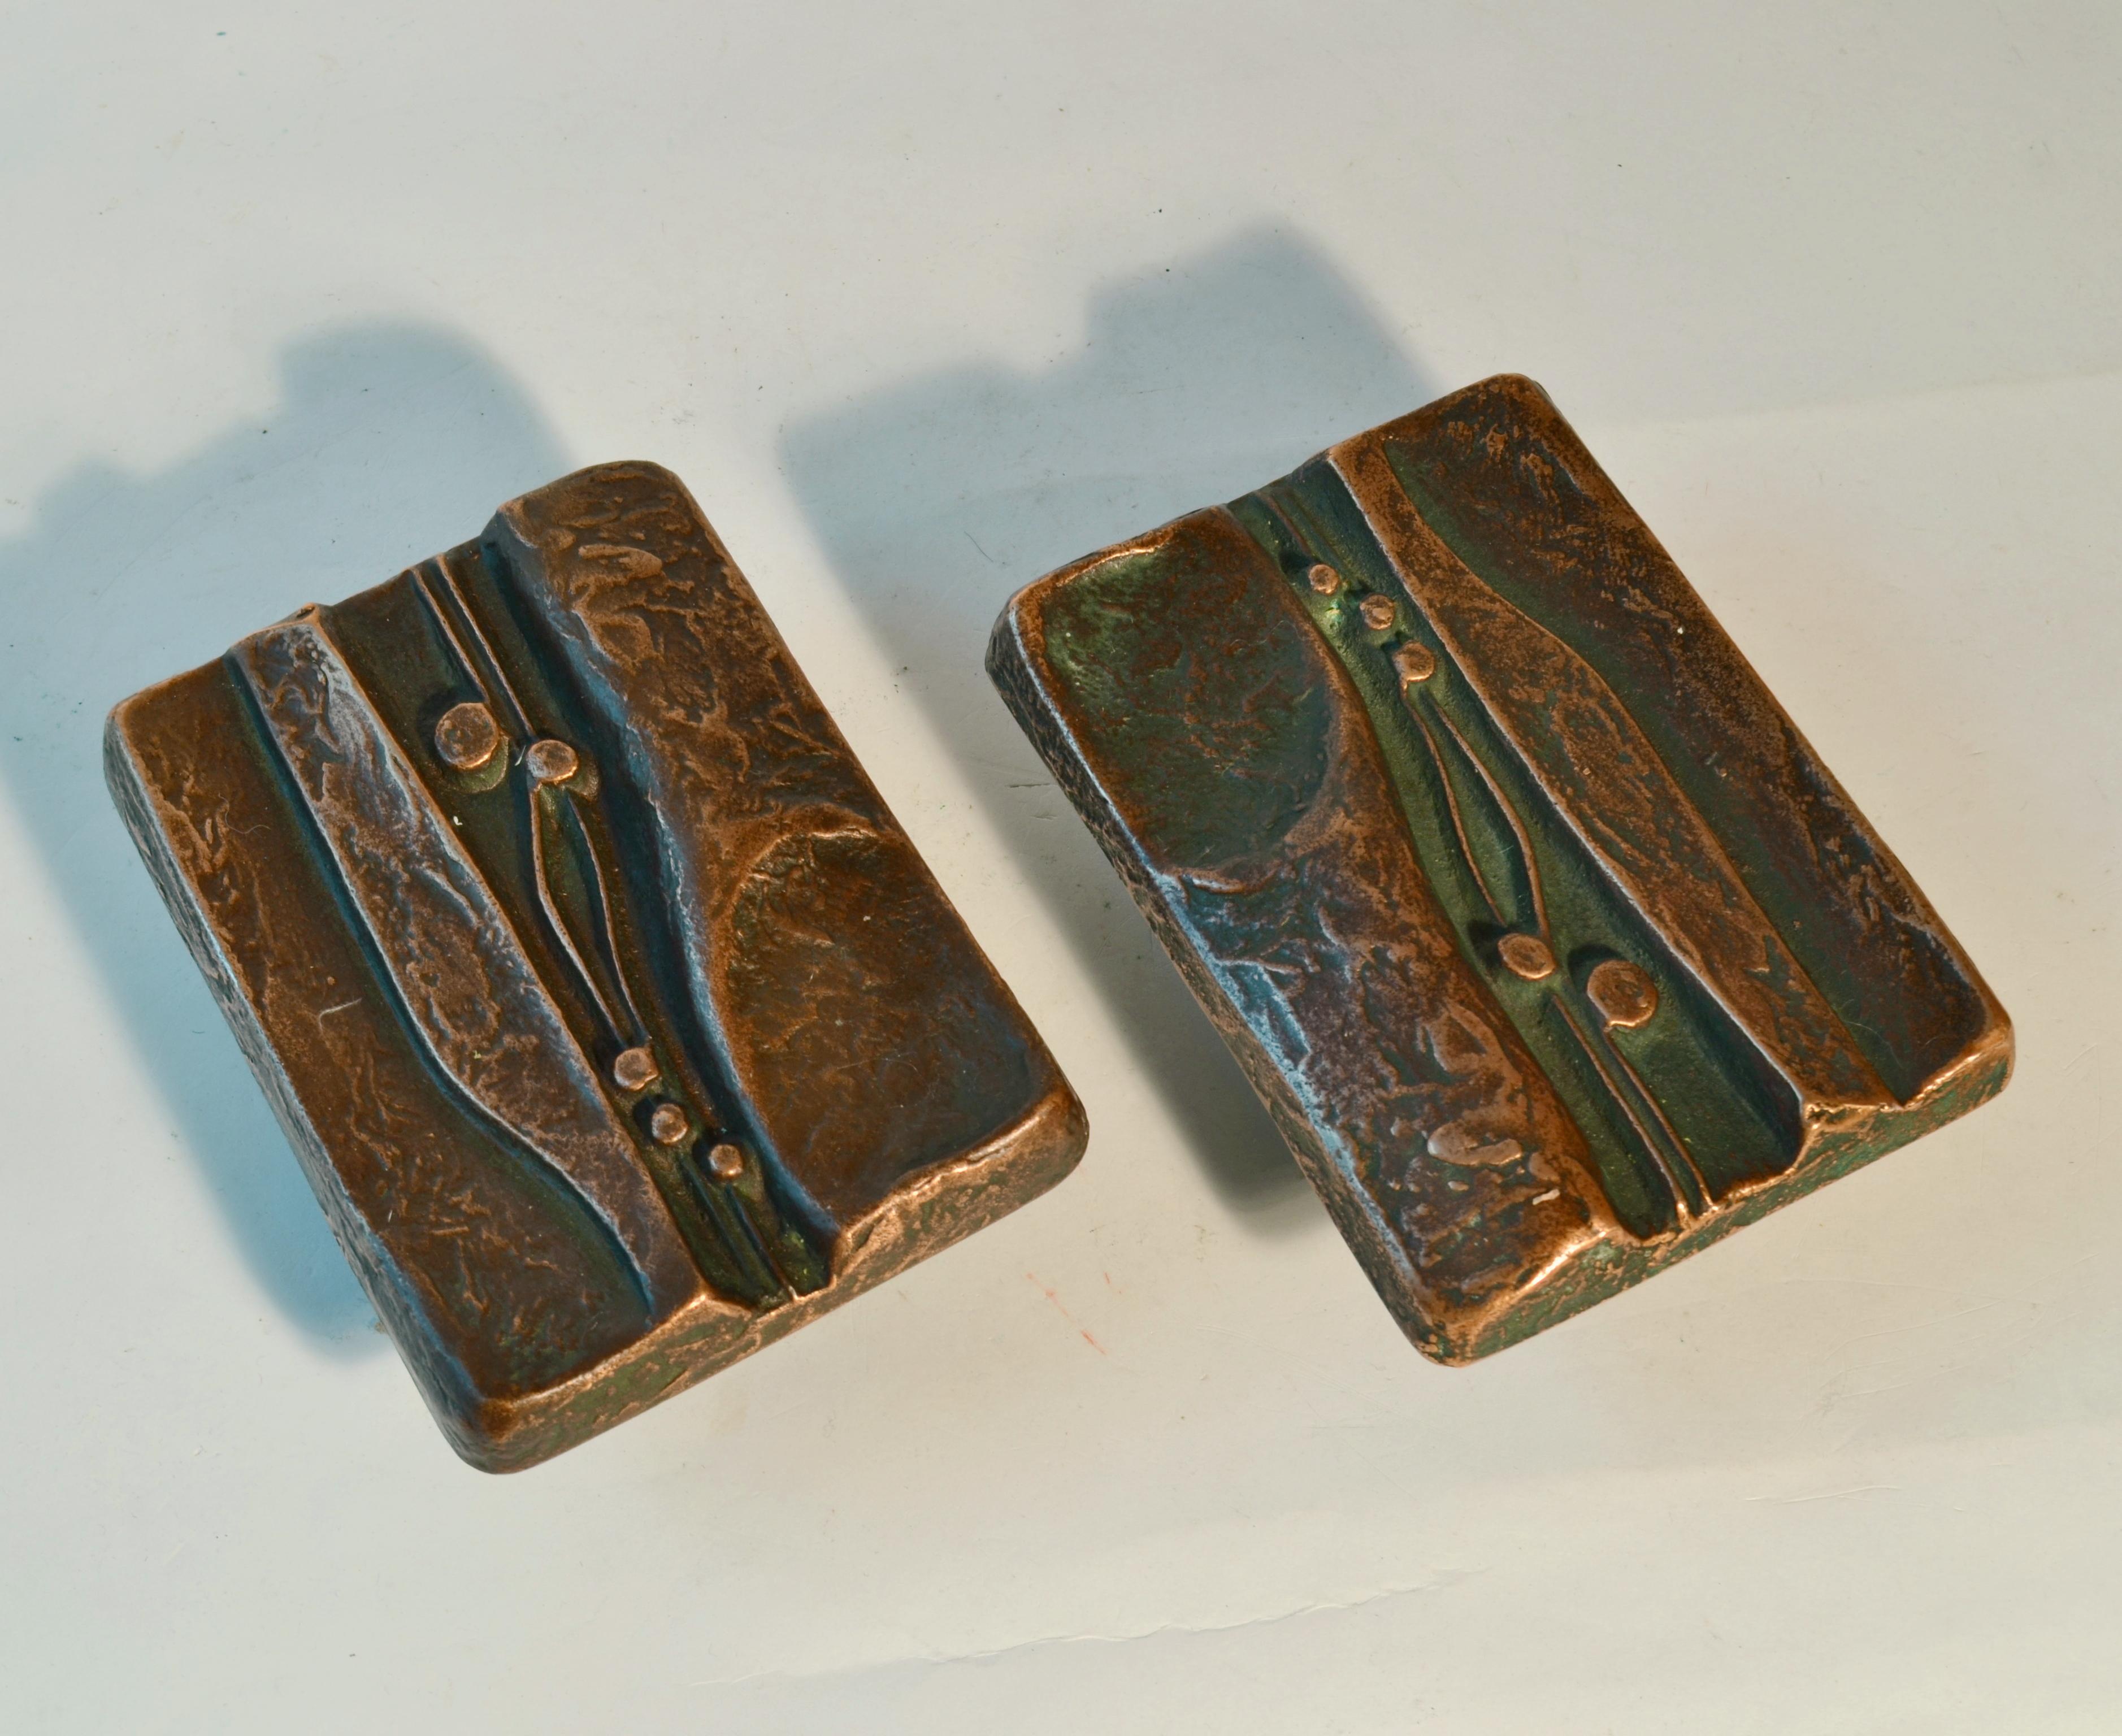 A set of two artistic Brutalist bronze door handles with textured design based on nature, which gives real personality touch to double doors. The handles are heavily textured and slightly curved, with lots of movement and depth in the design. They